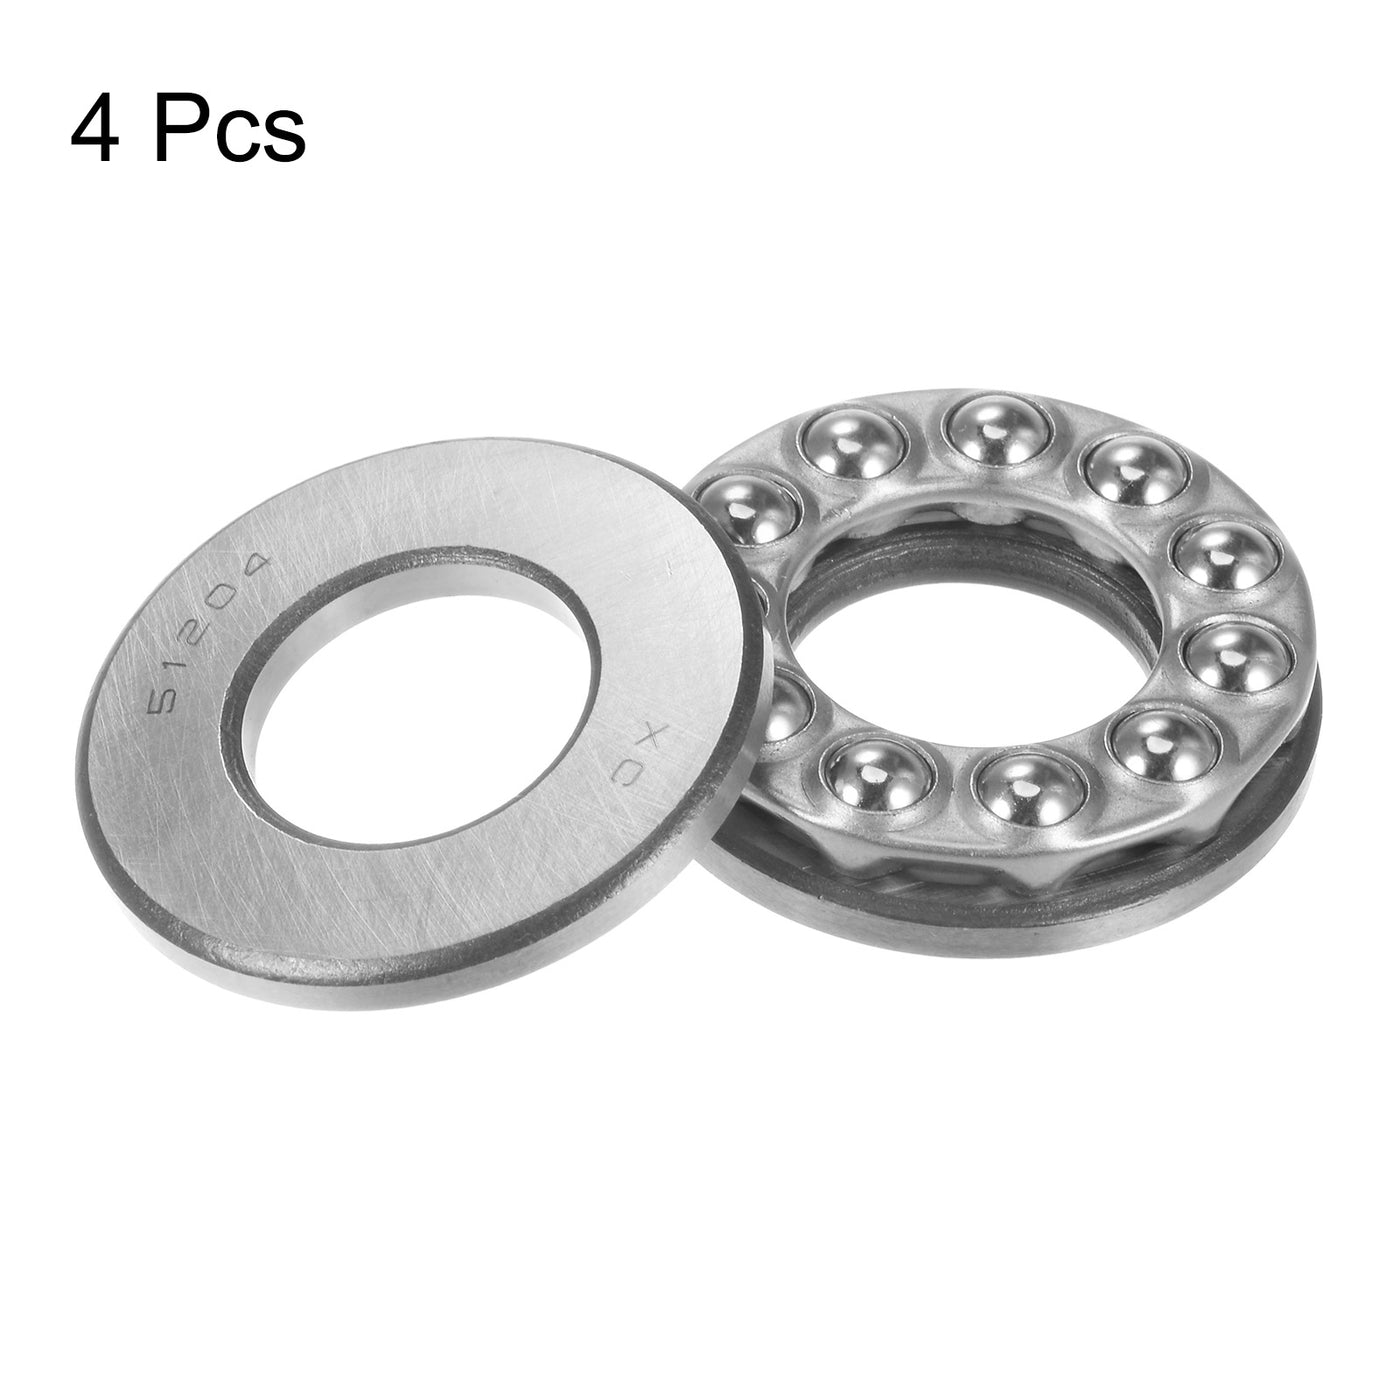 uxcell Uxcell 51204 Thrust Ball Bearing 20x40x14mm High Carbon Steel with Washers 4pcs